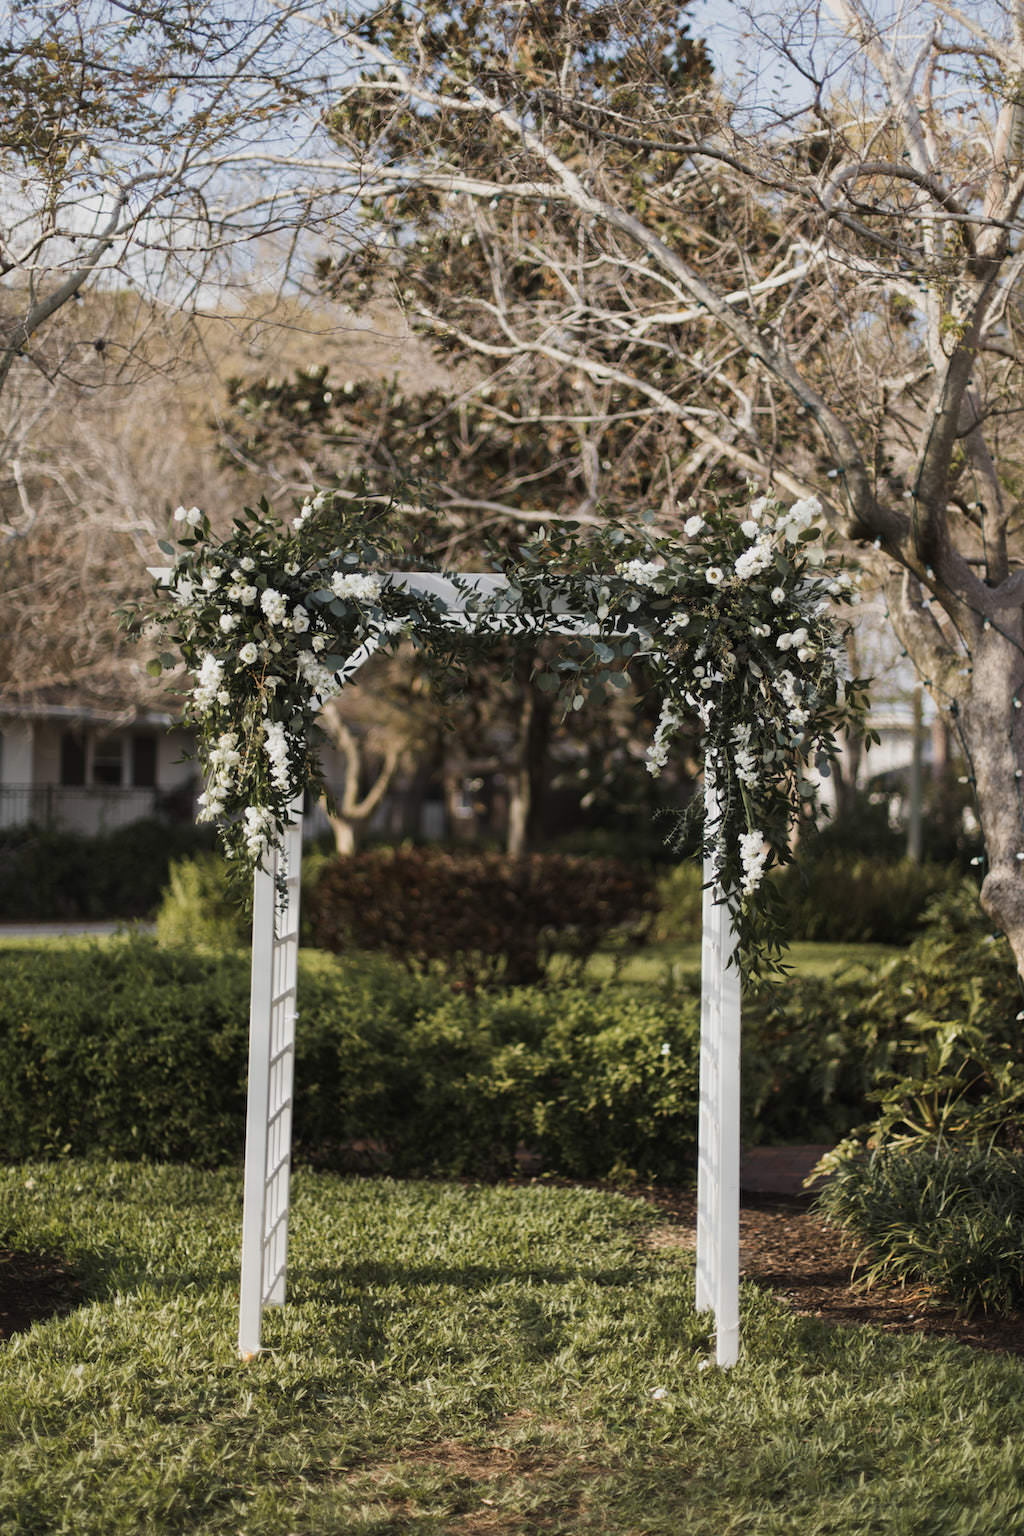 Garden Inspired Wedding Ceremony Decor, White Wooden Arch with Greenery and White Florals | St. Petersburg Woman’s Club